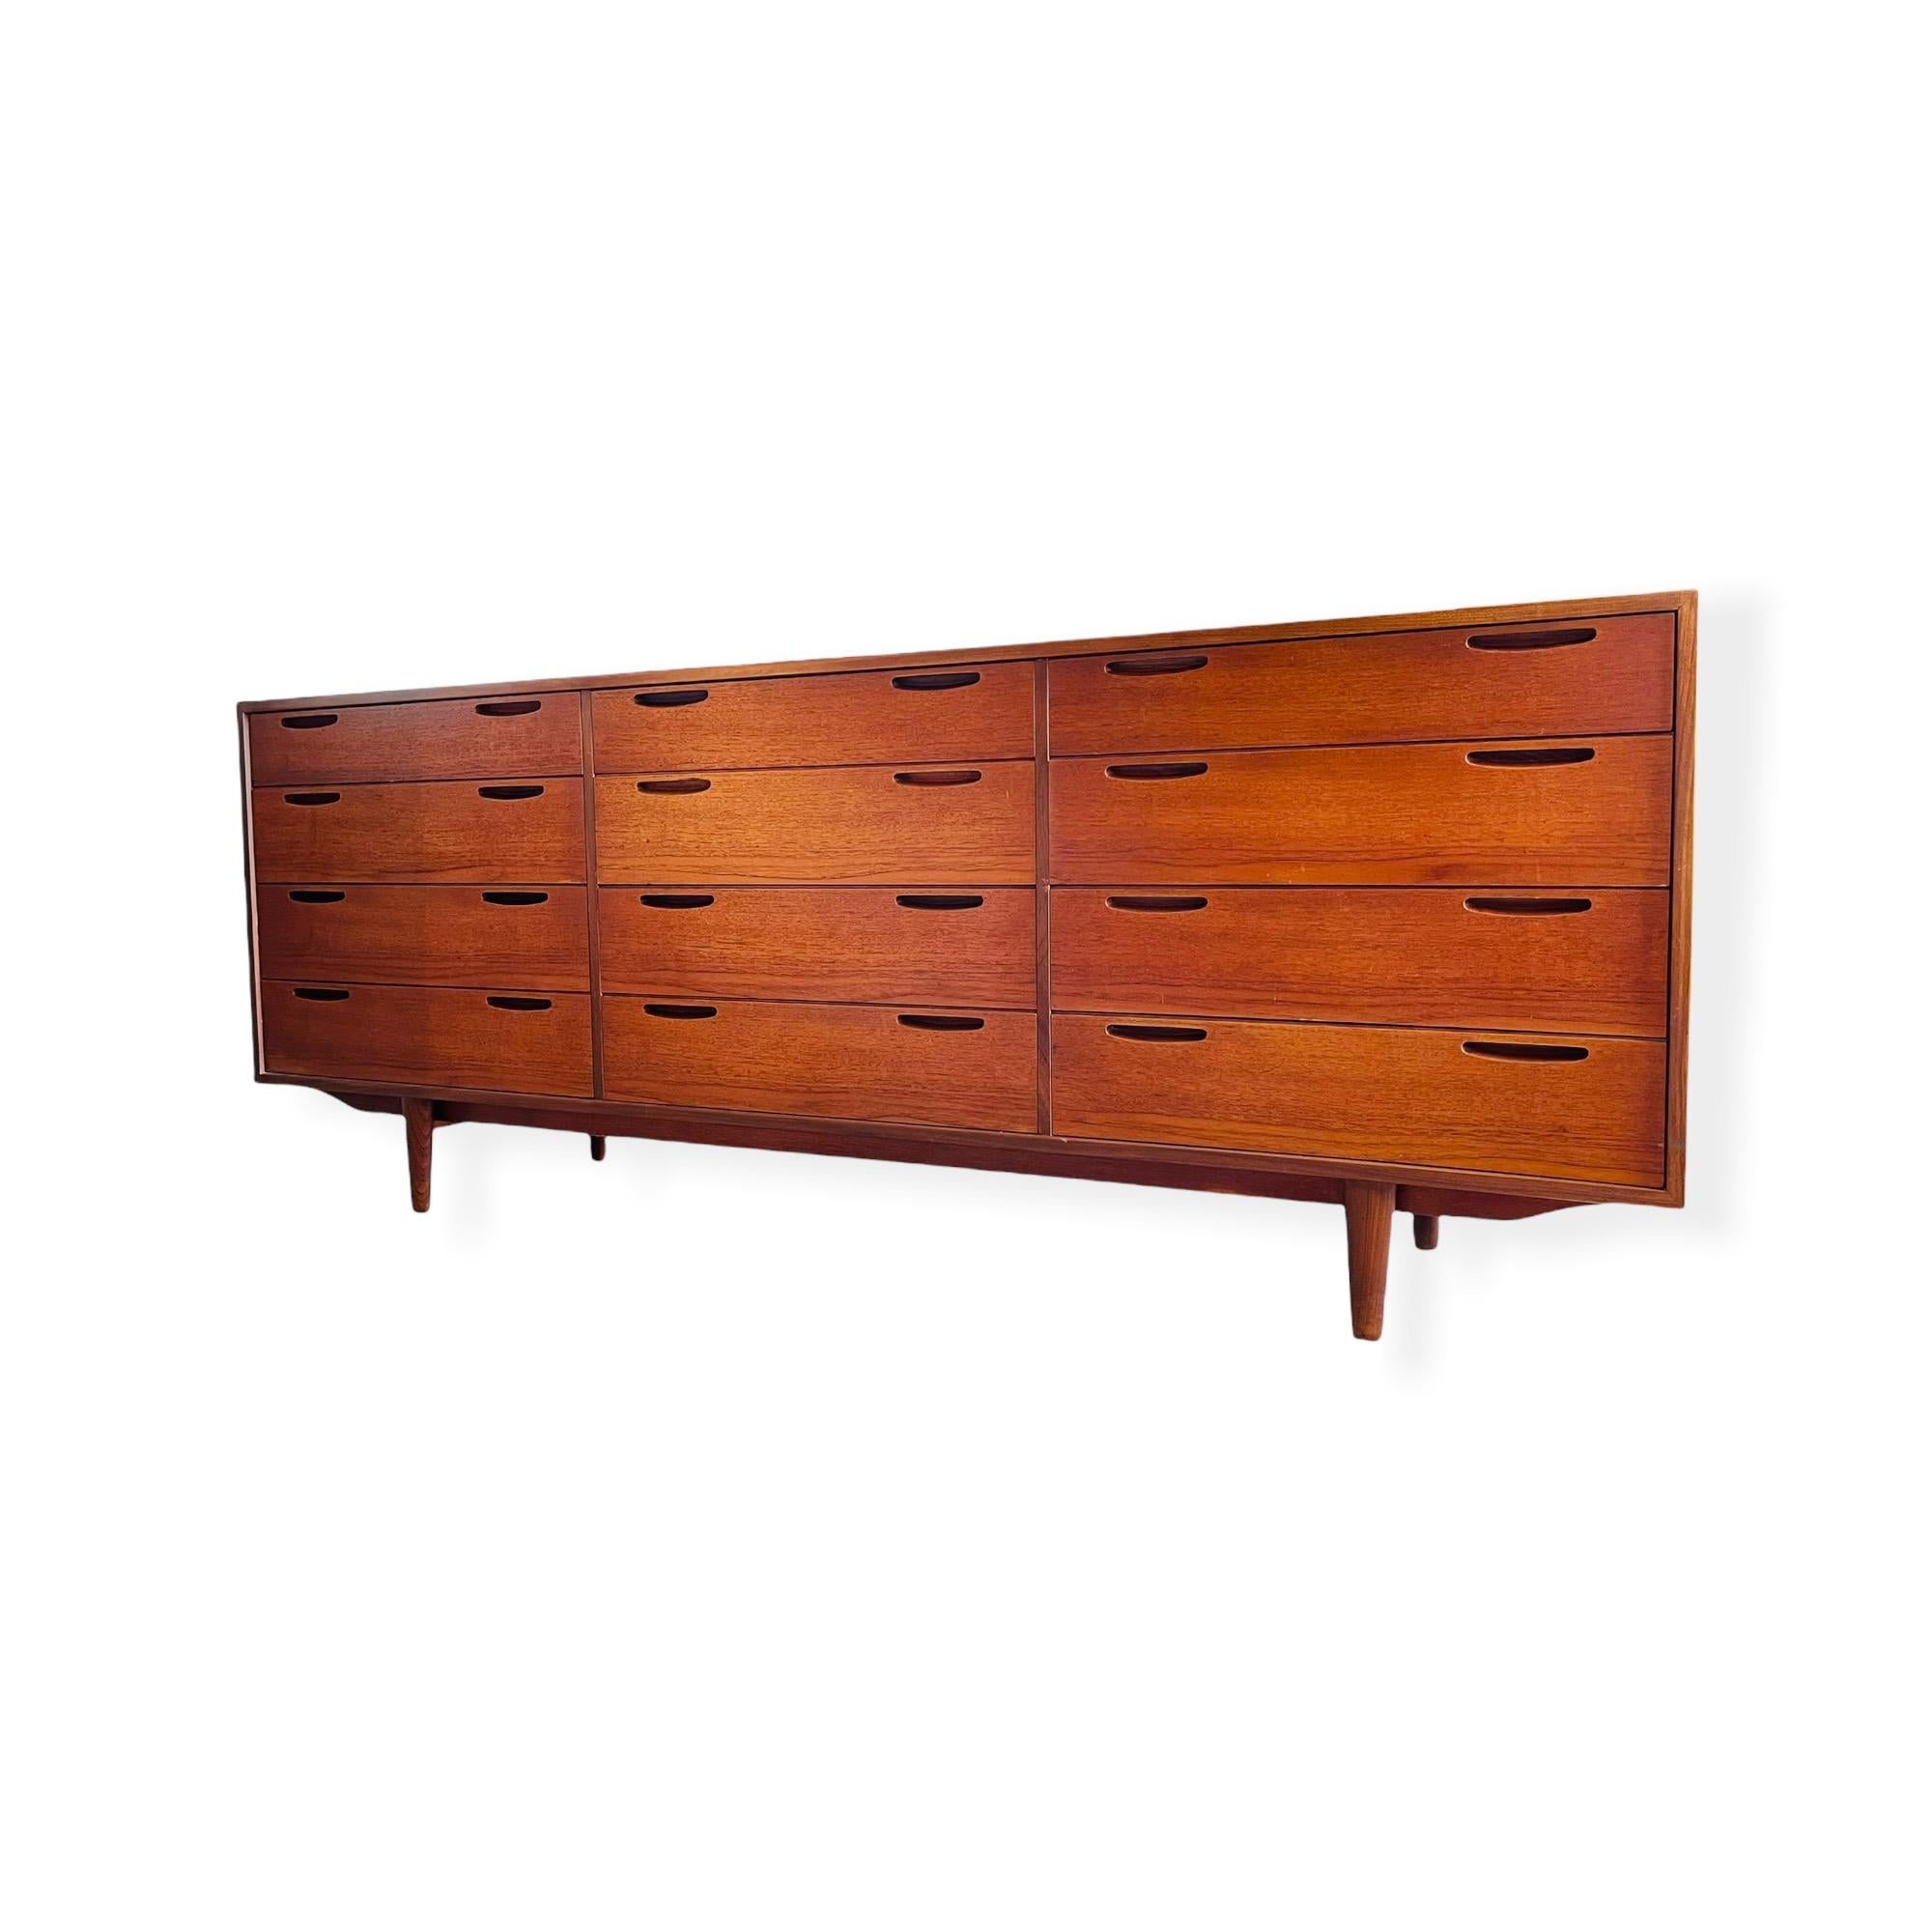 Here is a stunning mid-century Danish modern teak triple dresser by IB Kofod Larsen of Denmark. This dresser features 12 drawers with two sculpted drawer pulls on each drawer, beautiful tapered legs and a finished back. This dresser is in good